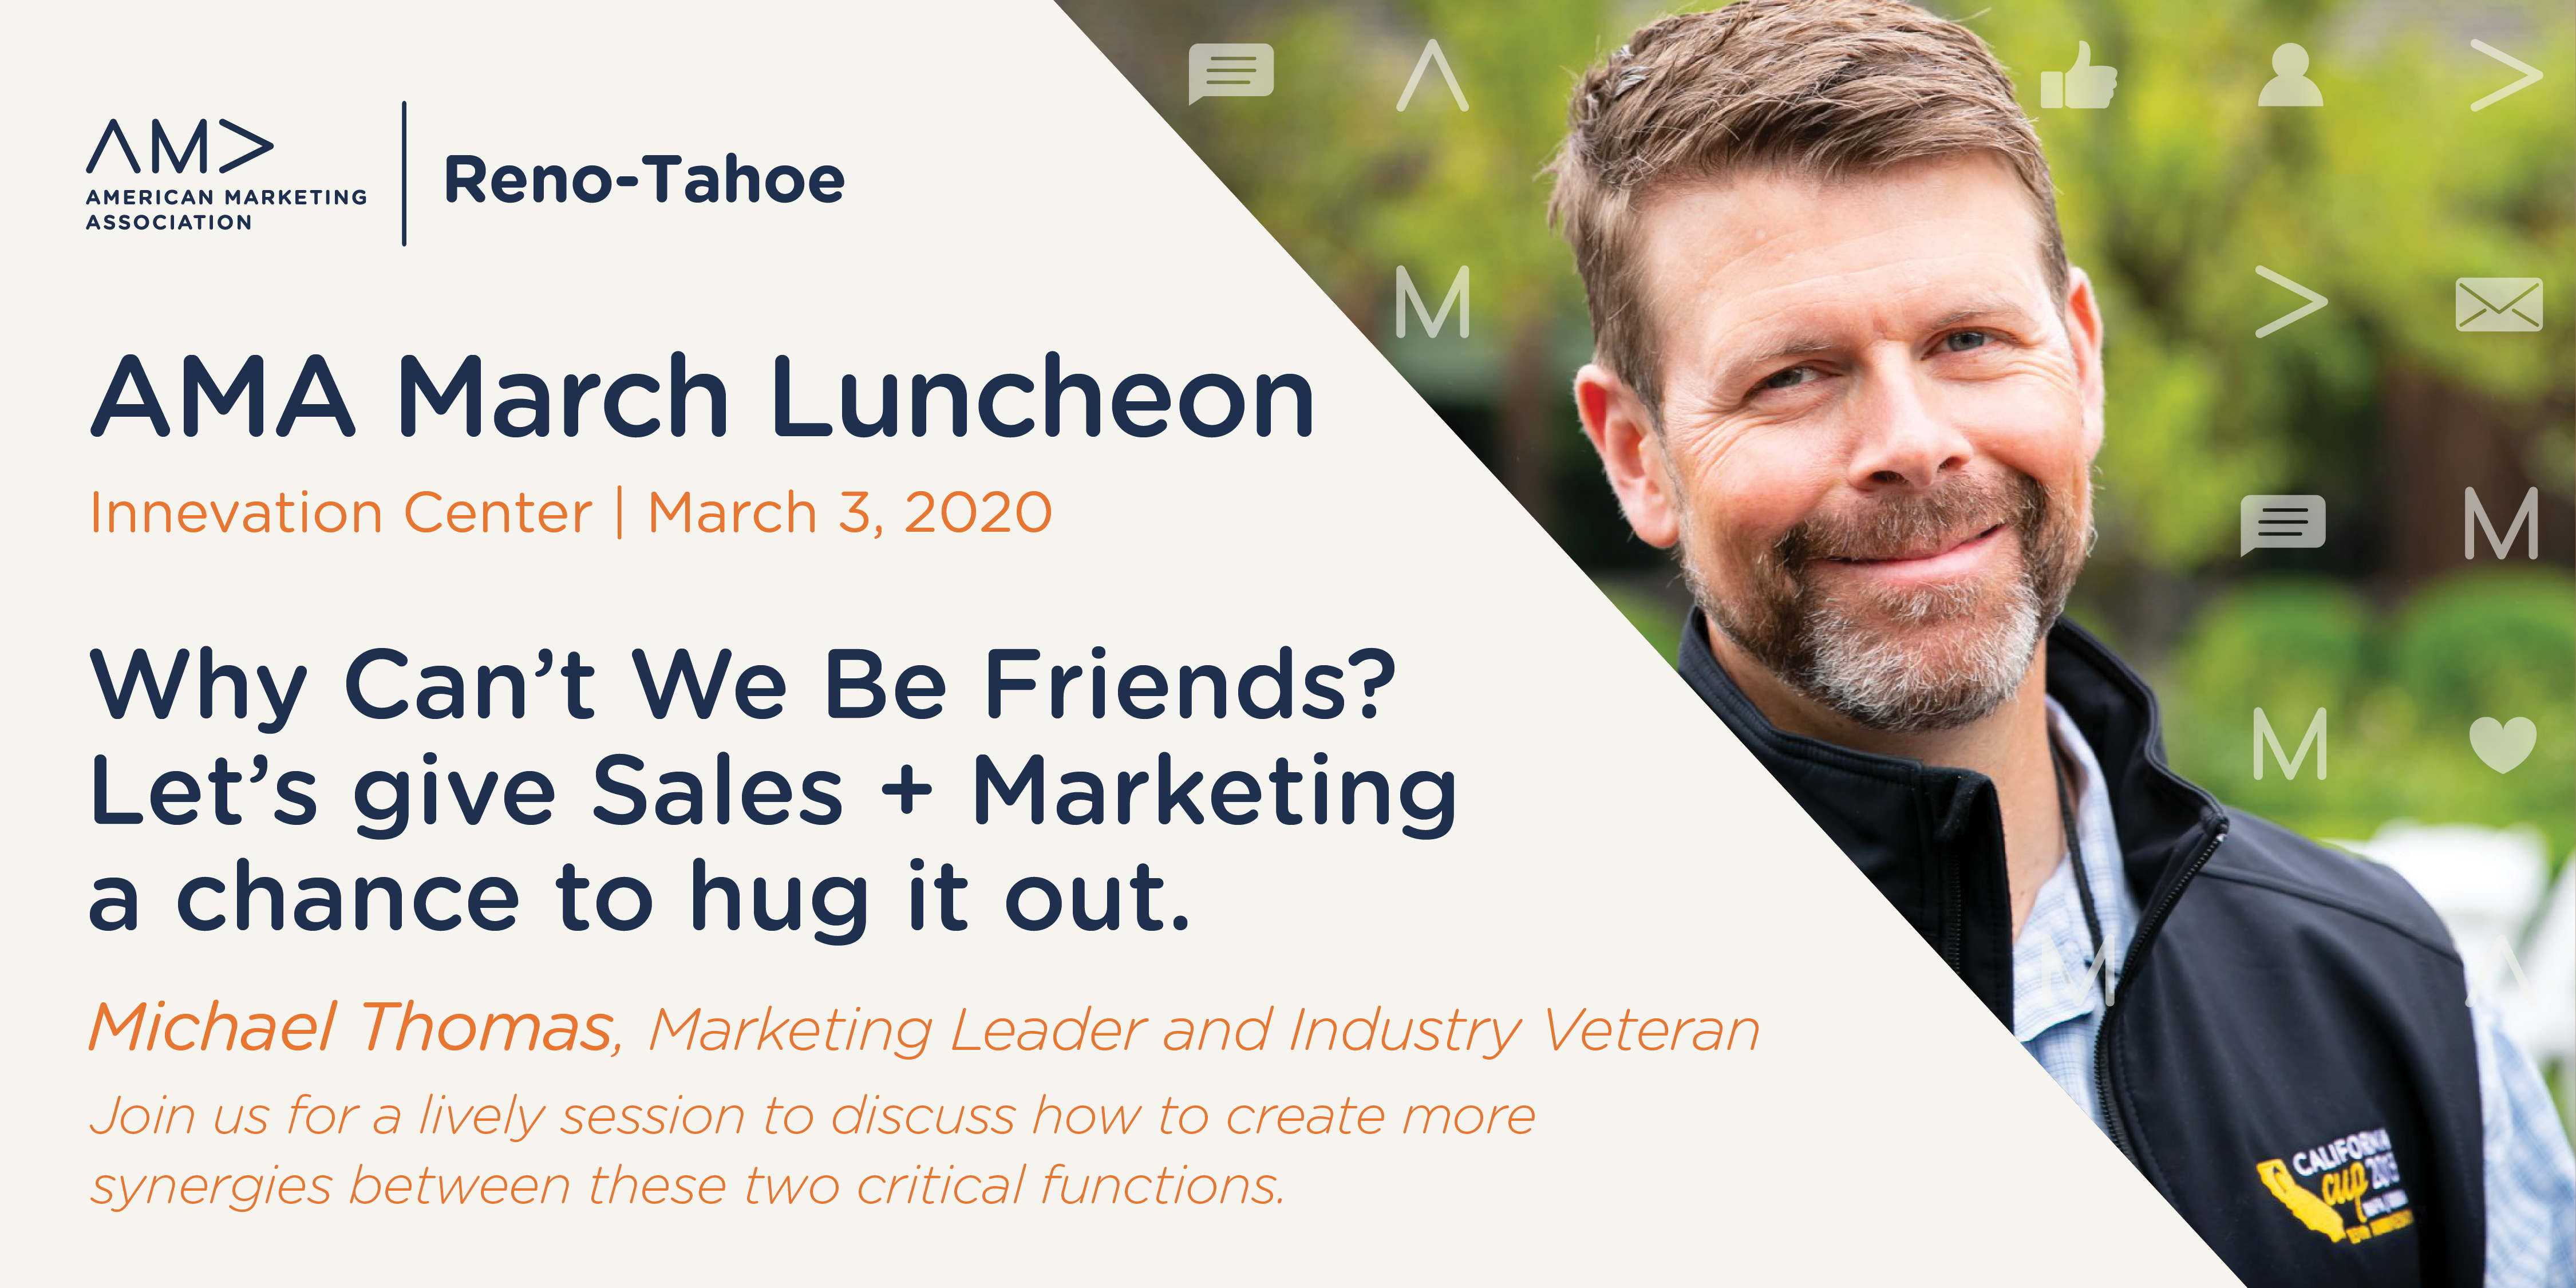 Why Can’t We Be Friends? Give Sales + Marketing a chance to hug it out